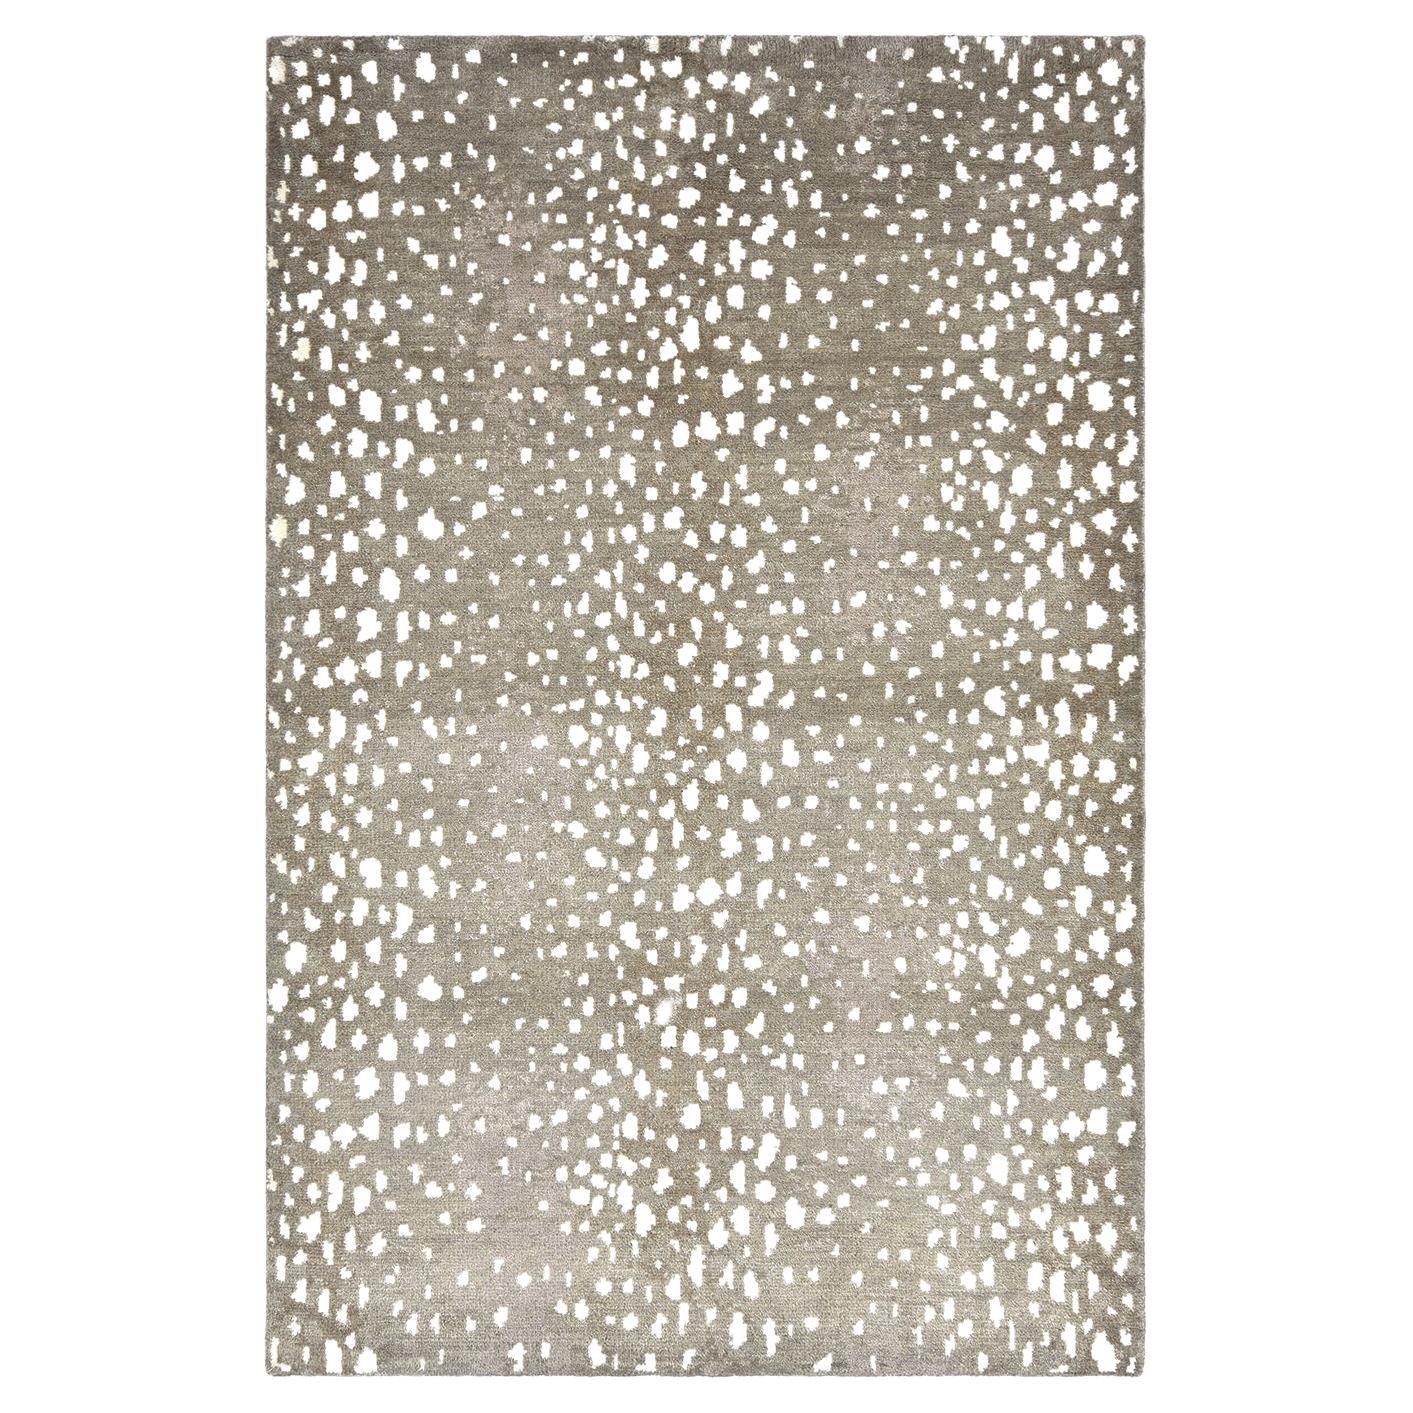 Solo Rugs Louis Contemporary Animal Handmade Area Rug Brown For Sale